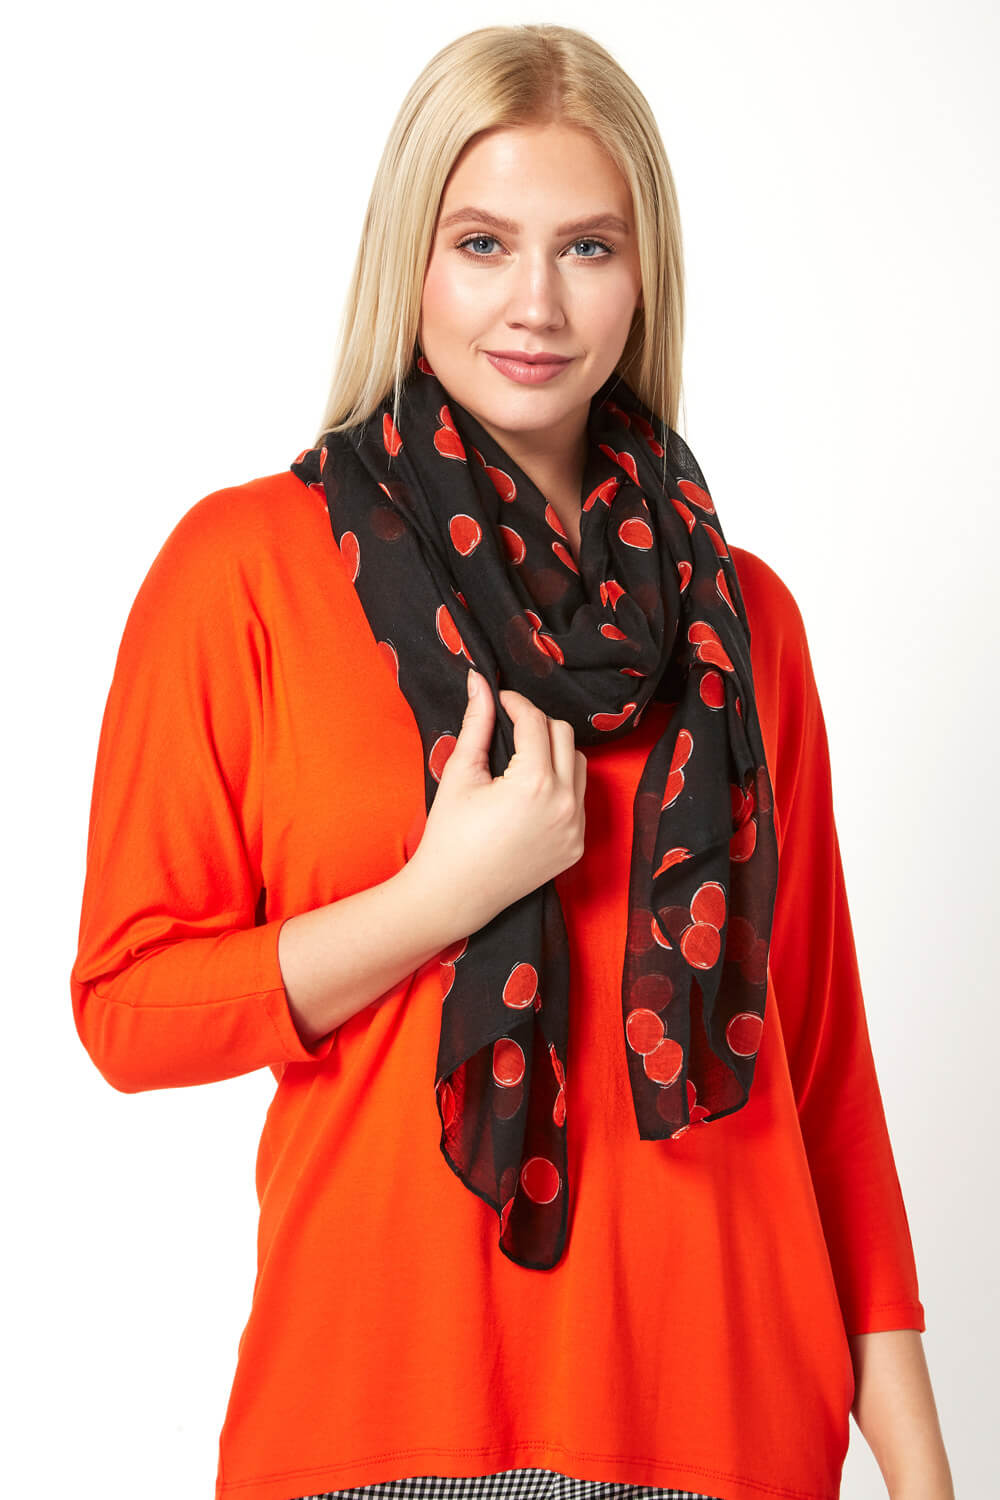 ORANGE Loose T-Shirt and Cherry Print Scarf, Image 4 of 5